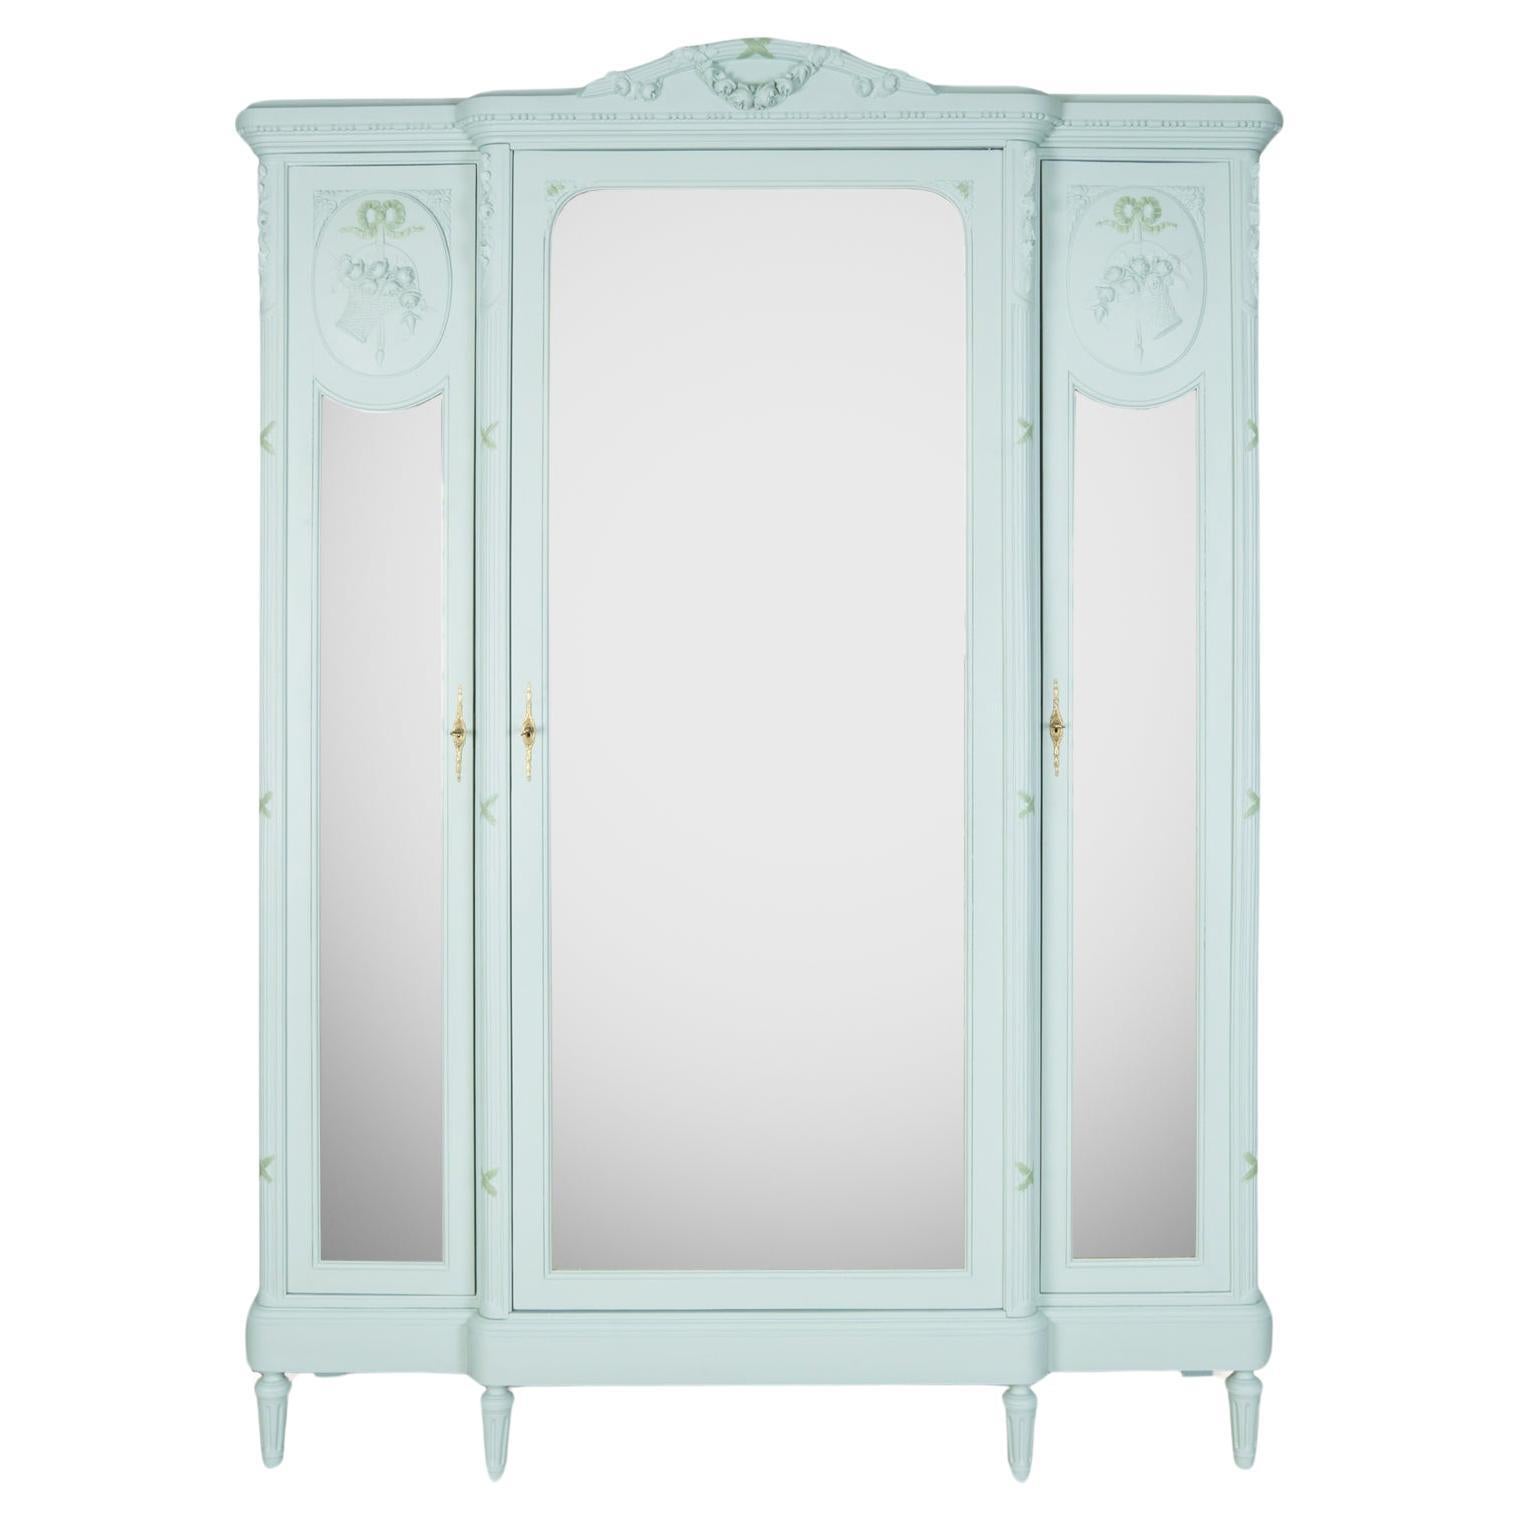 Antique French Louis XVI Style Painted Triple Door Mirror Armoire or Wardrobe